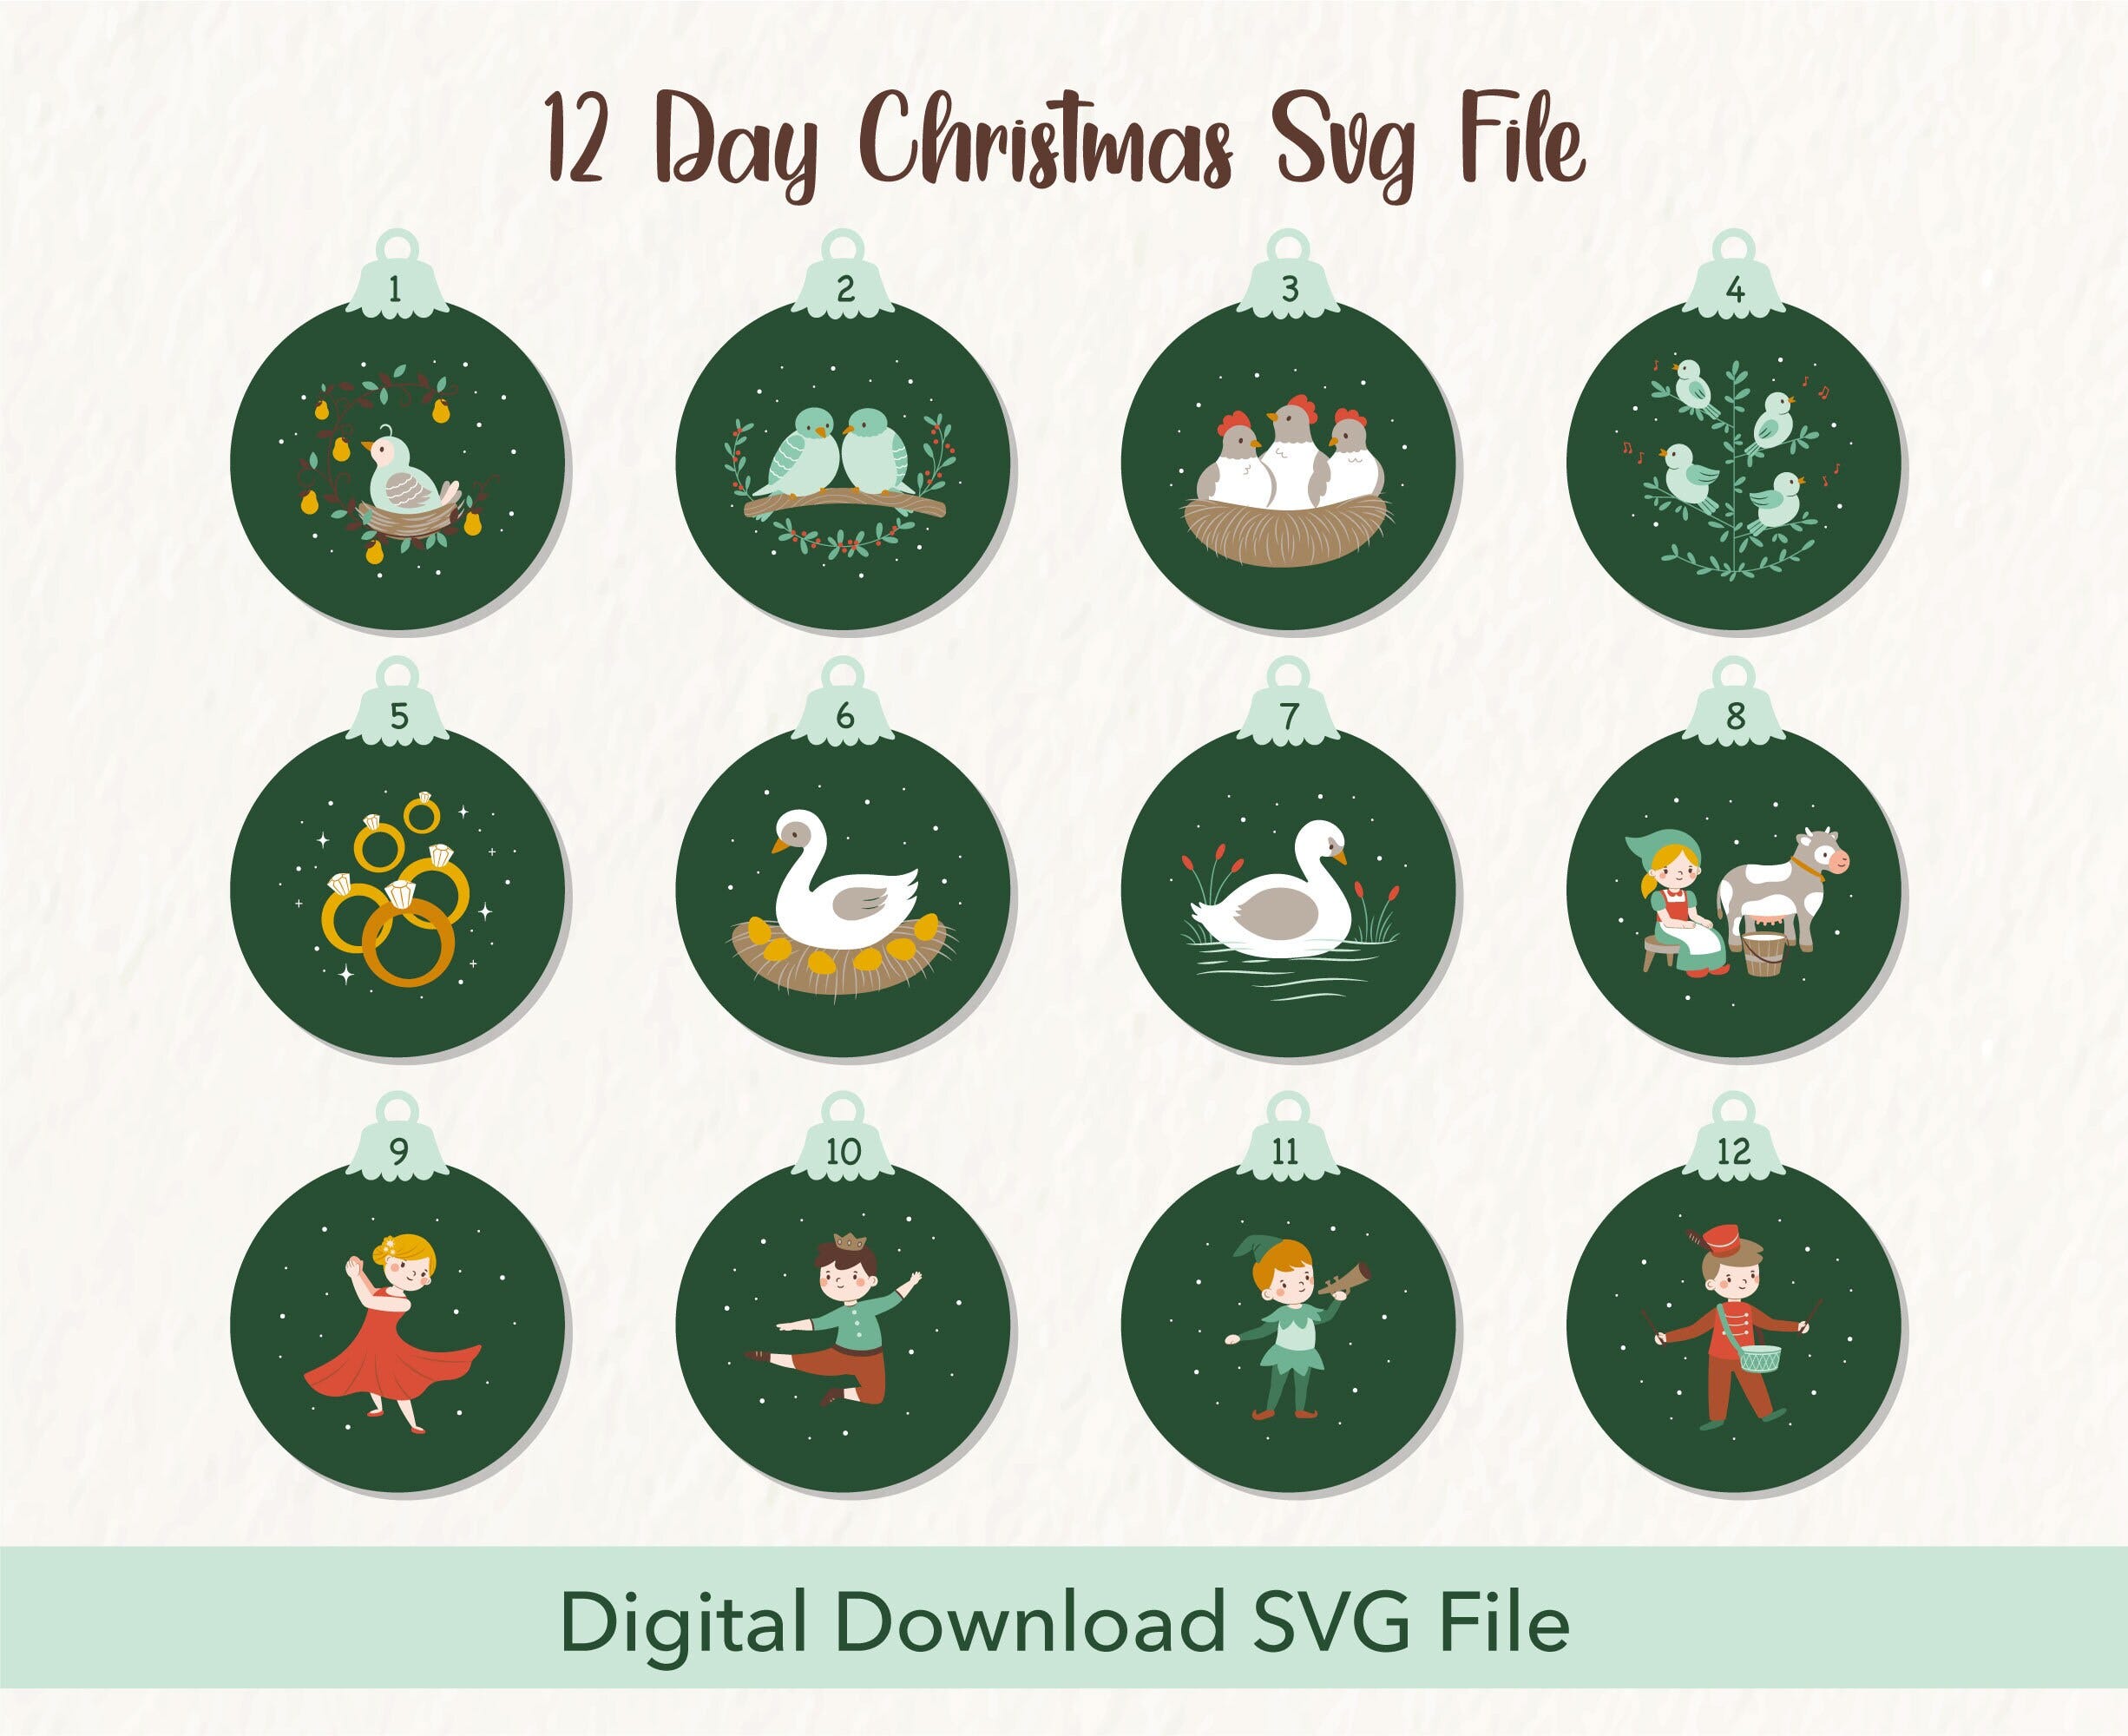 12 Days of Christmas Animated Greeting Card Template SVG | Printable | Instant Download SVG | Cricut